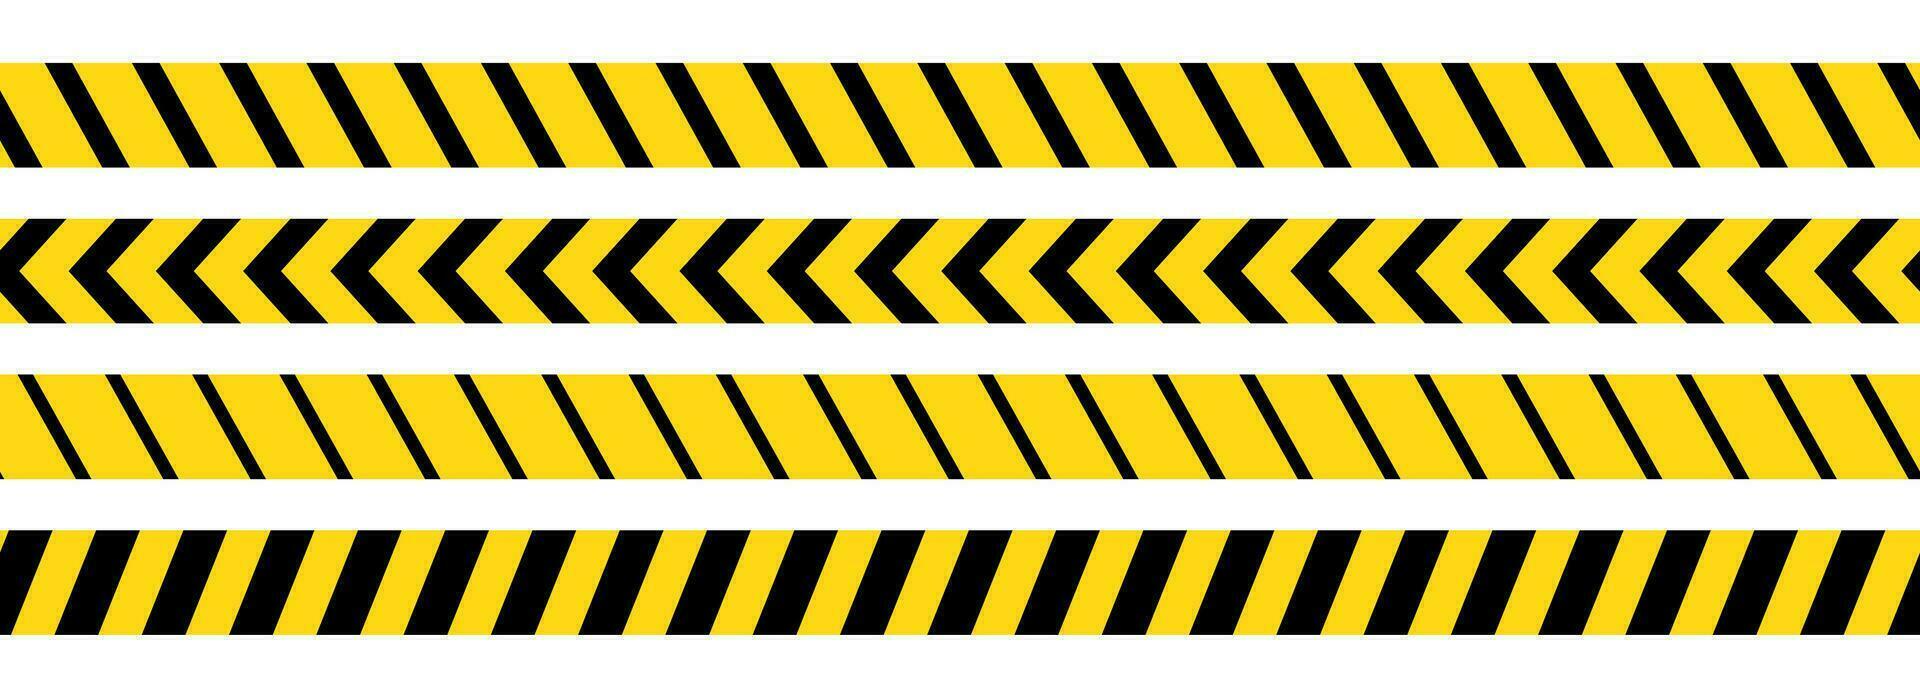 Caution, safety tape. Yellow, black stripe danger tape for atterntion, hazard ribbon. Police, construction area sign banner, barrier symbol vector